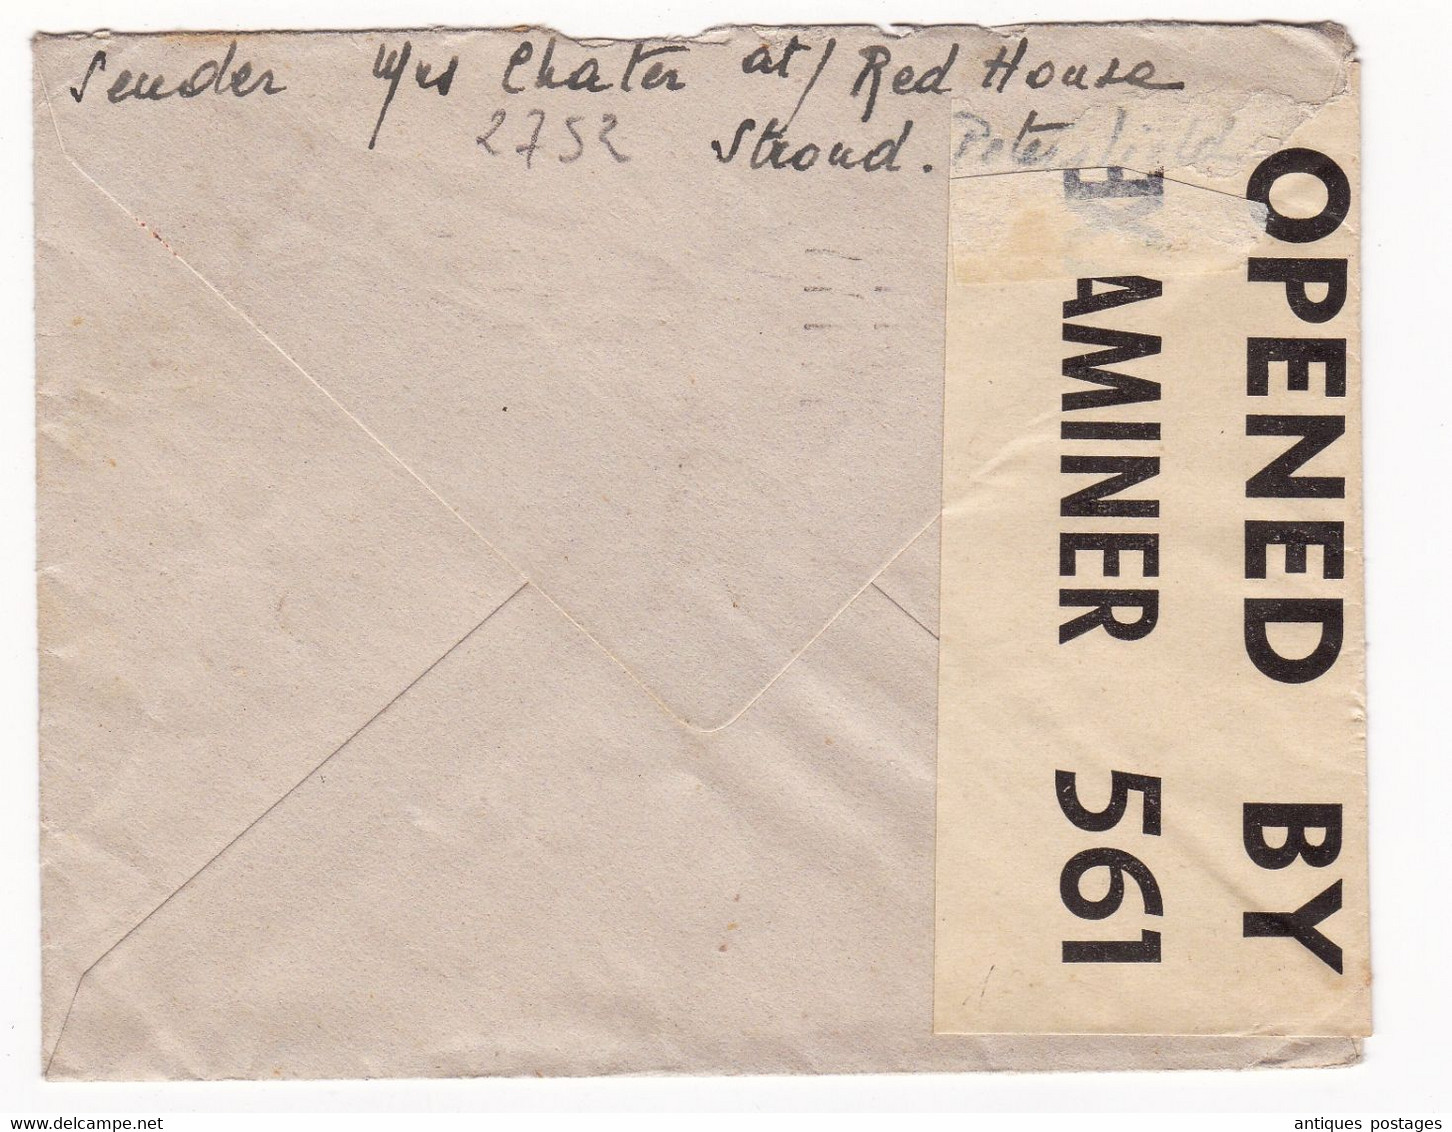 Petersfield 1940 England Censure Censor Lausanne Suisse Seconde Guerre Mondiale WW2 Opened By Examiner - Storia Postale